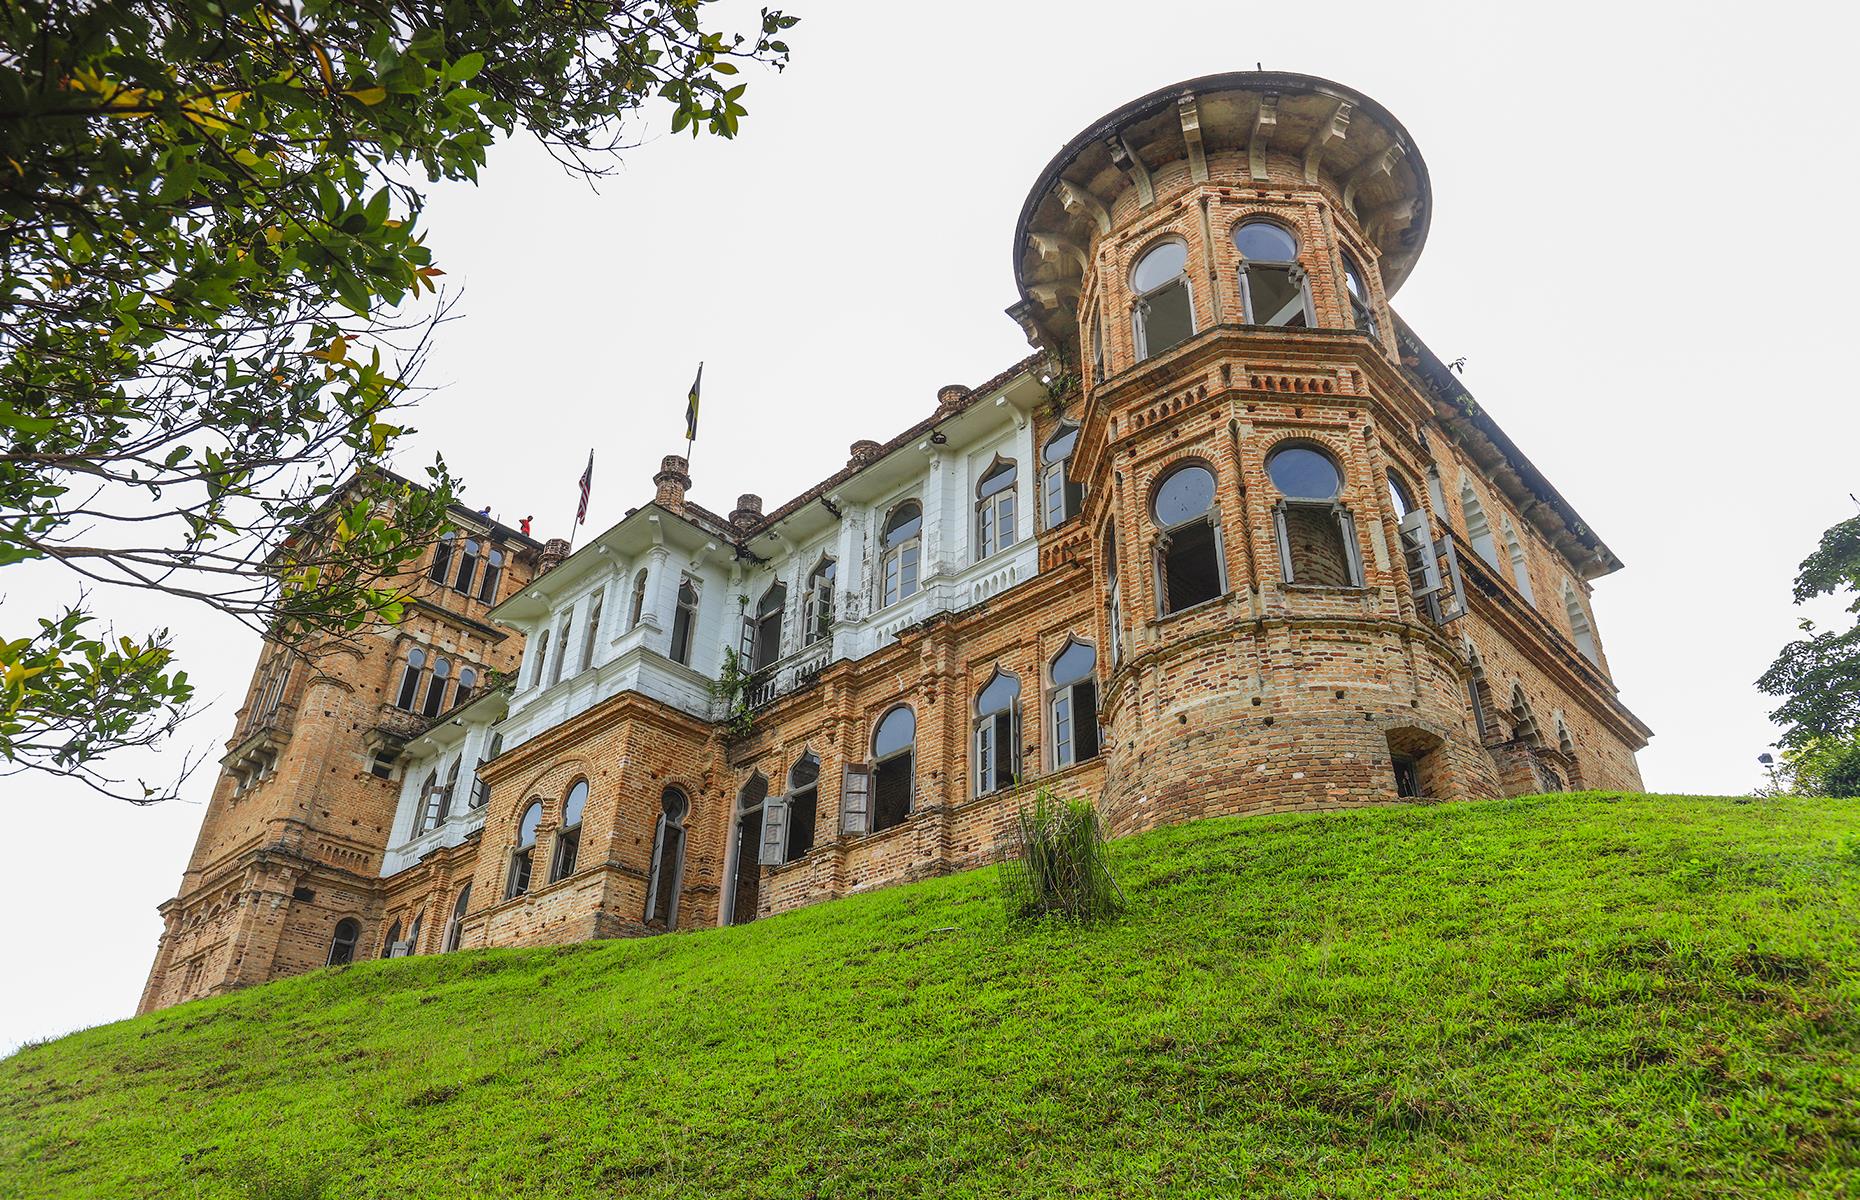 This turreted castle might look more at home in Europe than Asia – but it's actually located in the city of Batu Gajah in Malaysia. Scottish planter William Kellie Smith came to Malaysia to make his fortune, and ended up building this lavish abode for himself and his wife, Agnes. But when Kellie died suddenly, his family abandoned the mansion and it fell into disrepair. Modern-day visitors say they've spotted spectral faces in the windows and even spied William himself pacing the halls.